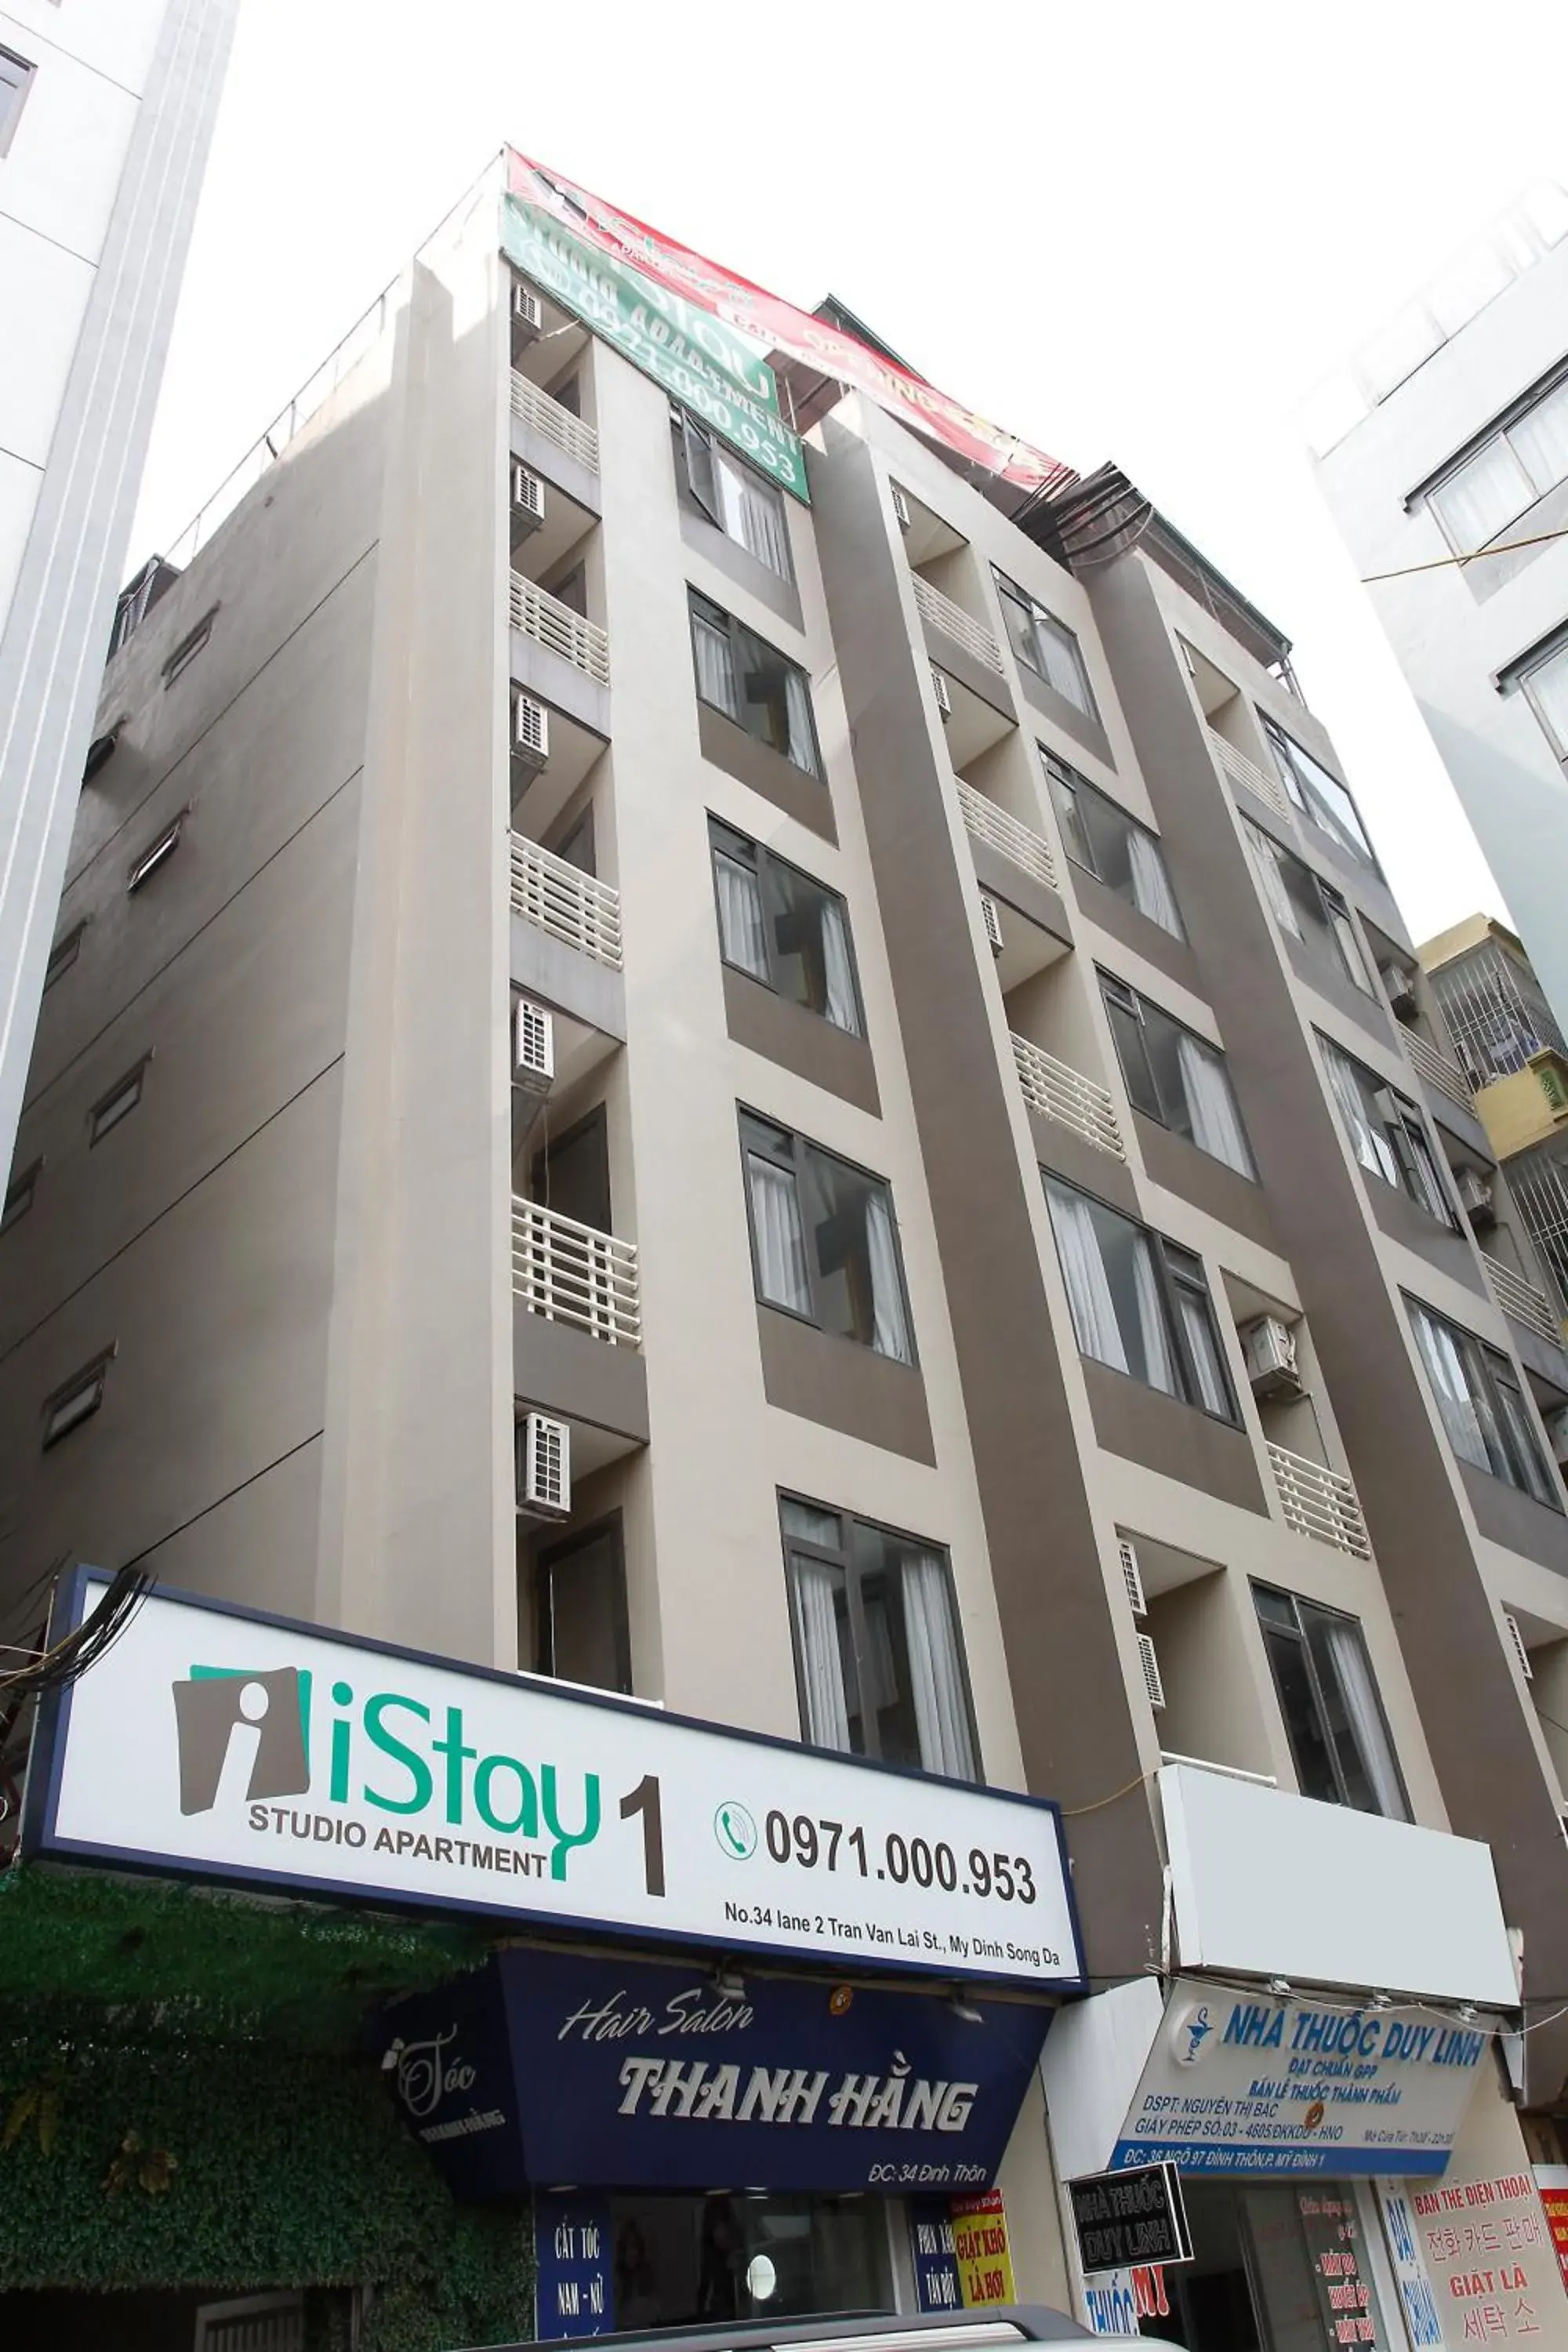 Property Building in ISTAY Hotel Apartment 1